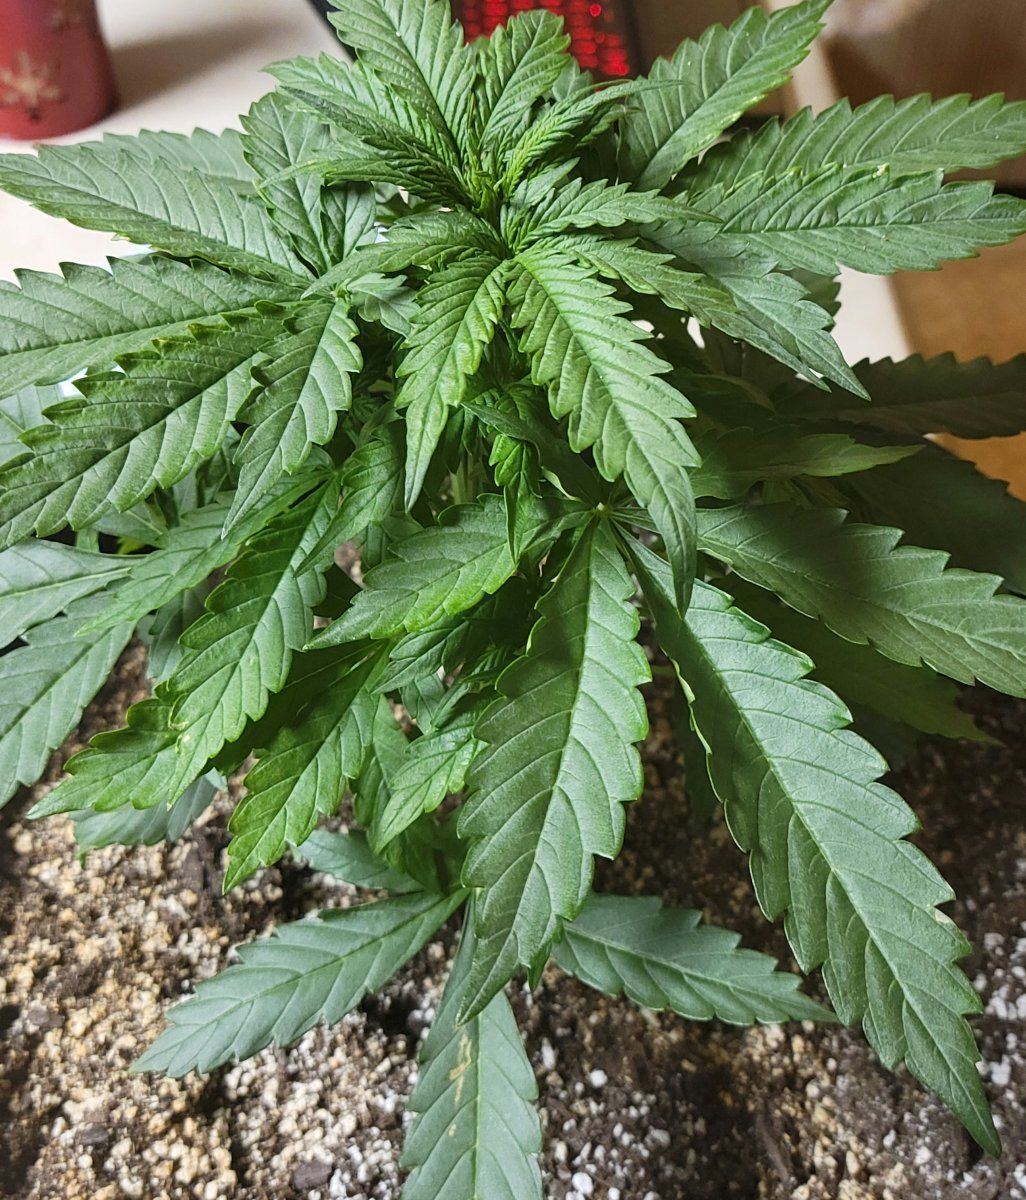 Yellow and brown spots on autoflower